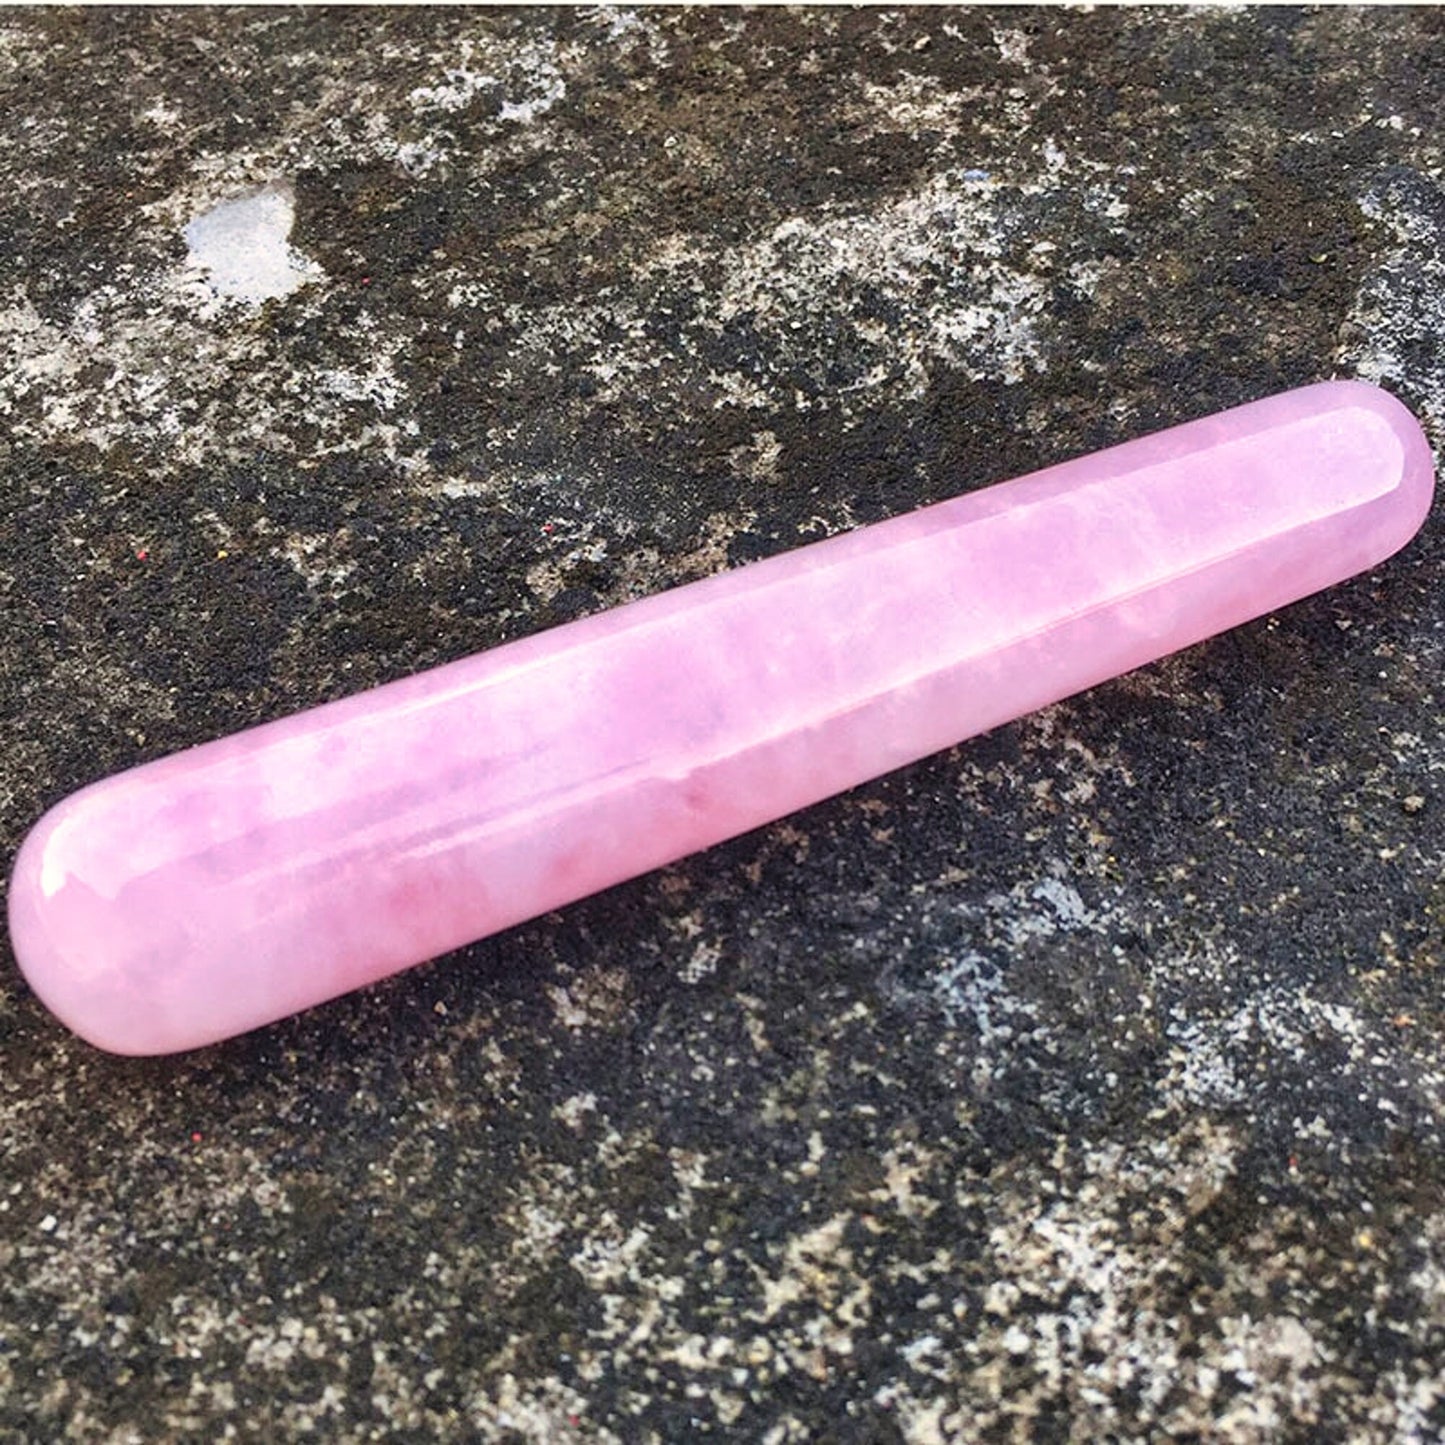 Natural Rose Quartz Crystal Massage Wand for Relaxation, Reiki Healing, and Chakra Face & Body Massage - Acupoint Point Stick